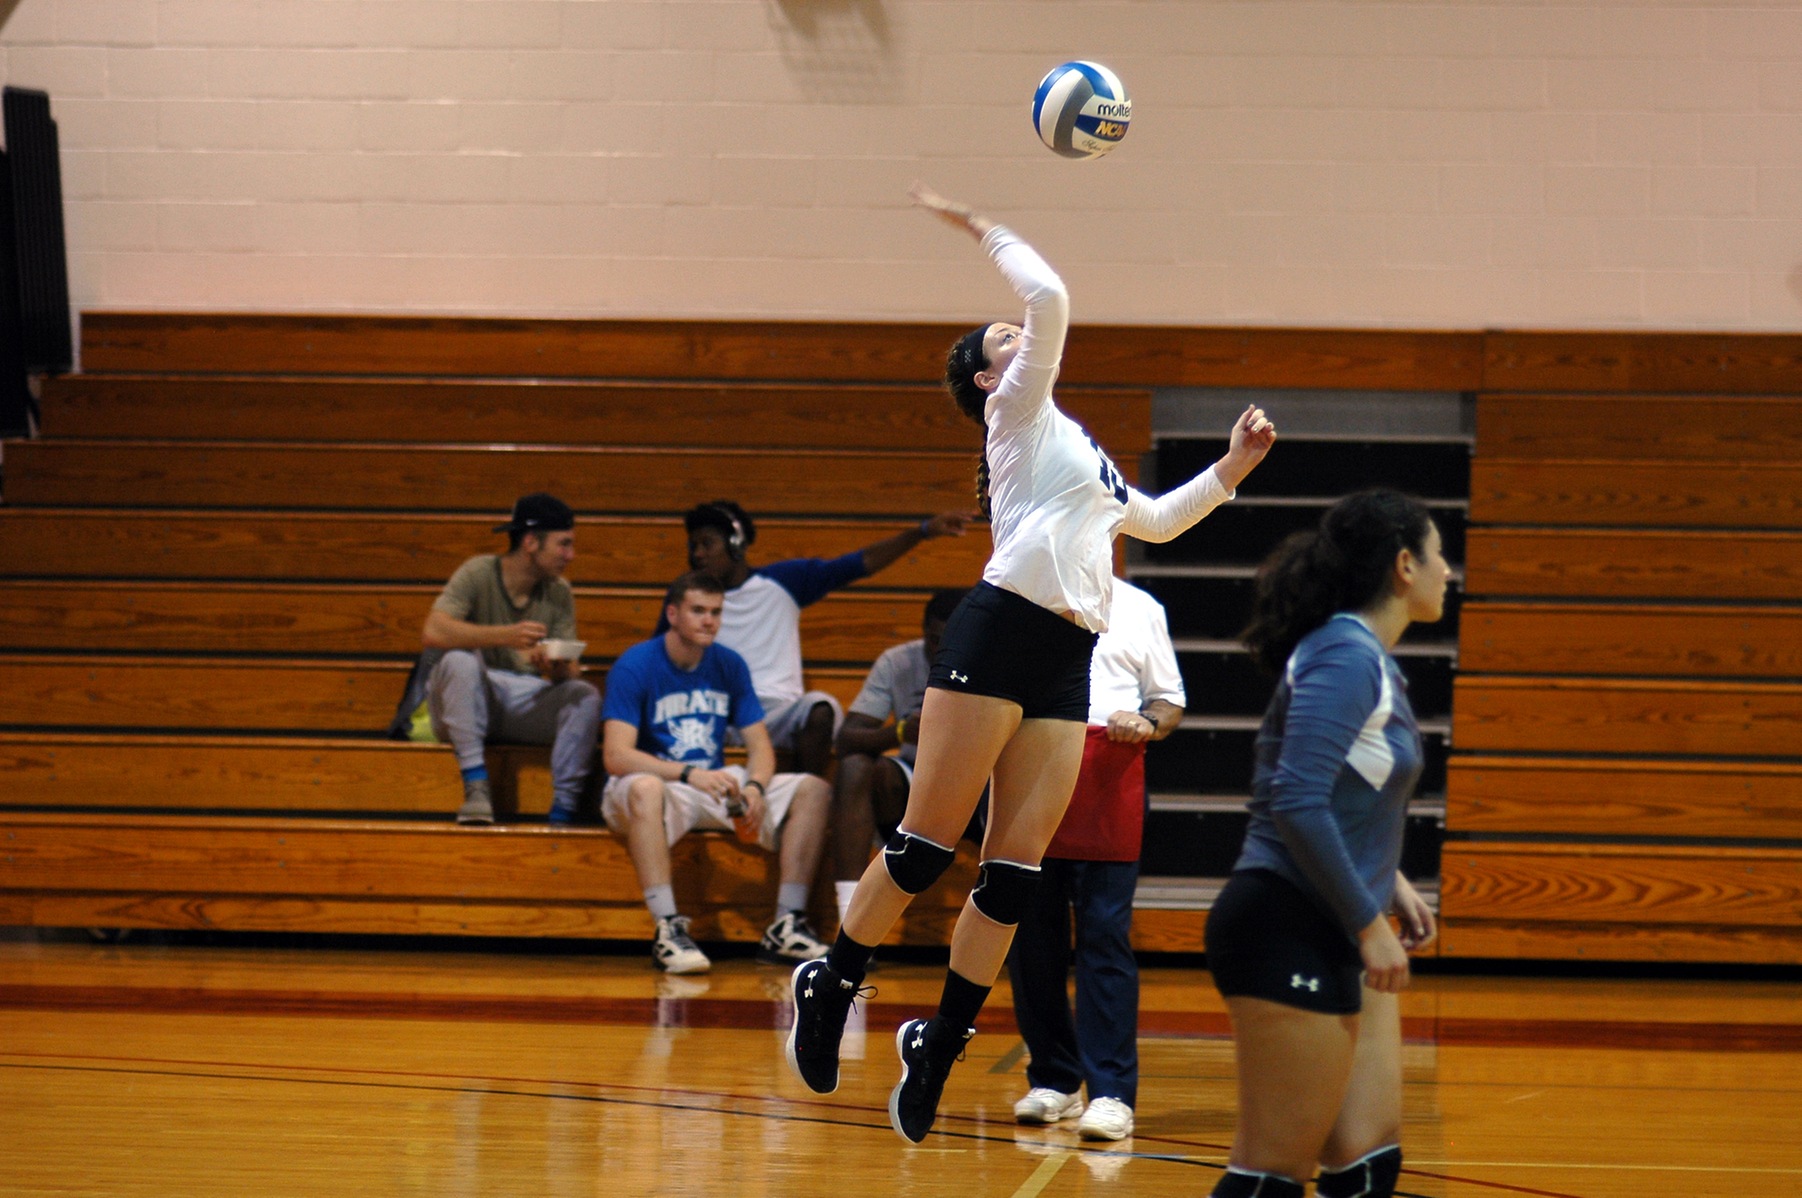 CONCORDIA CLIPS LADY CHARGERS